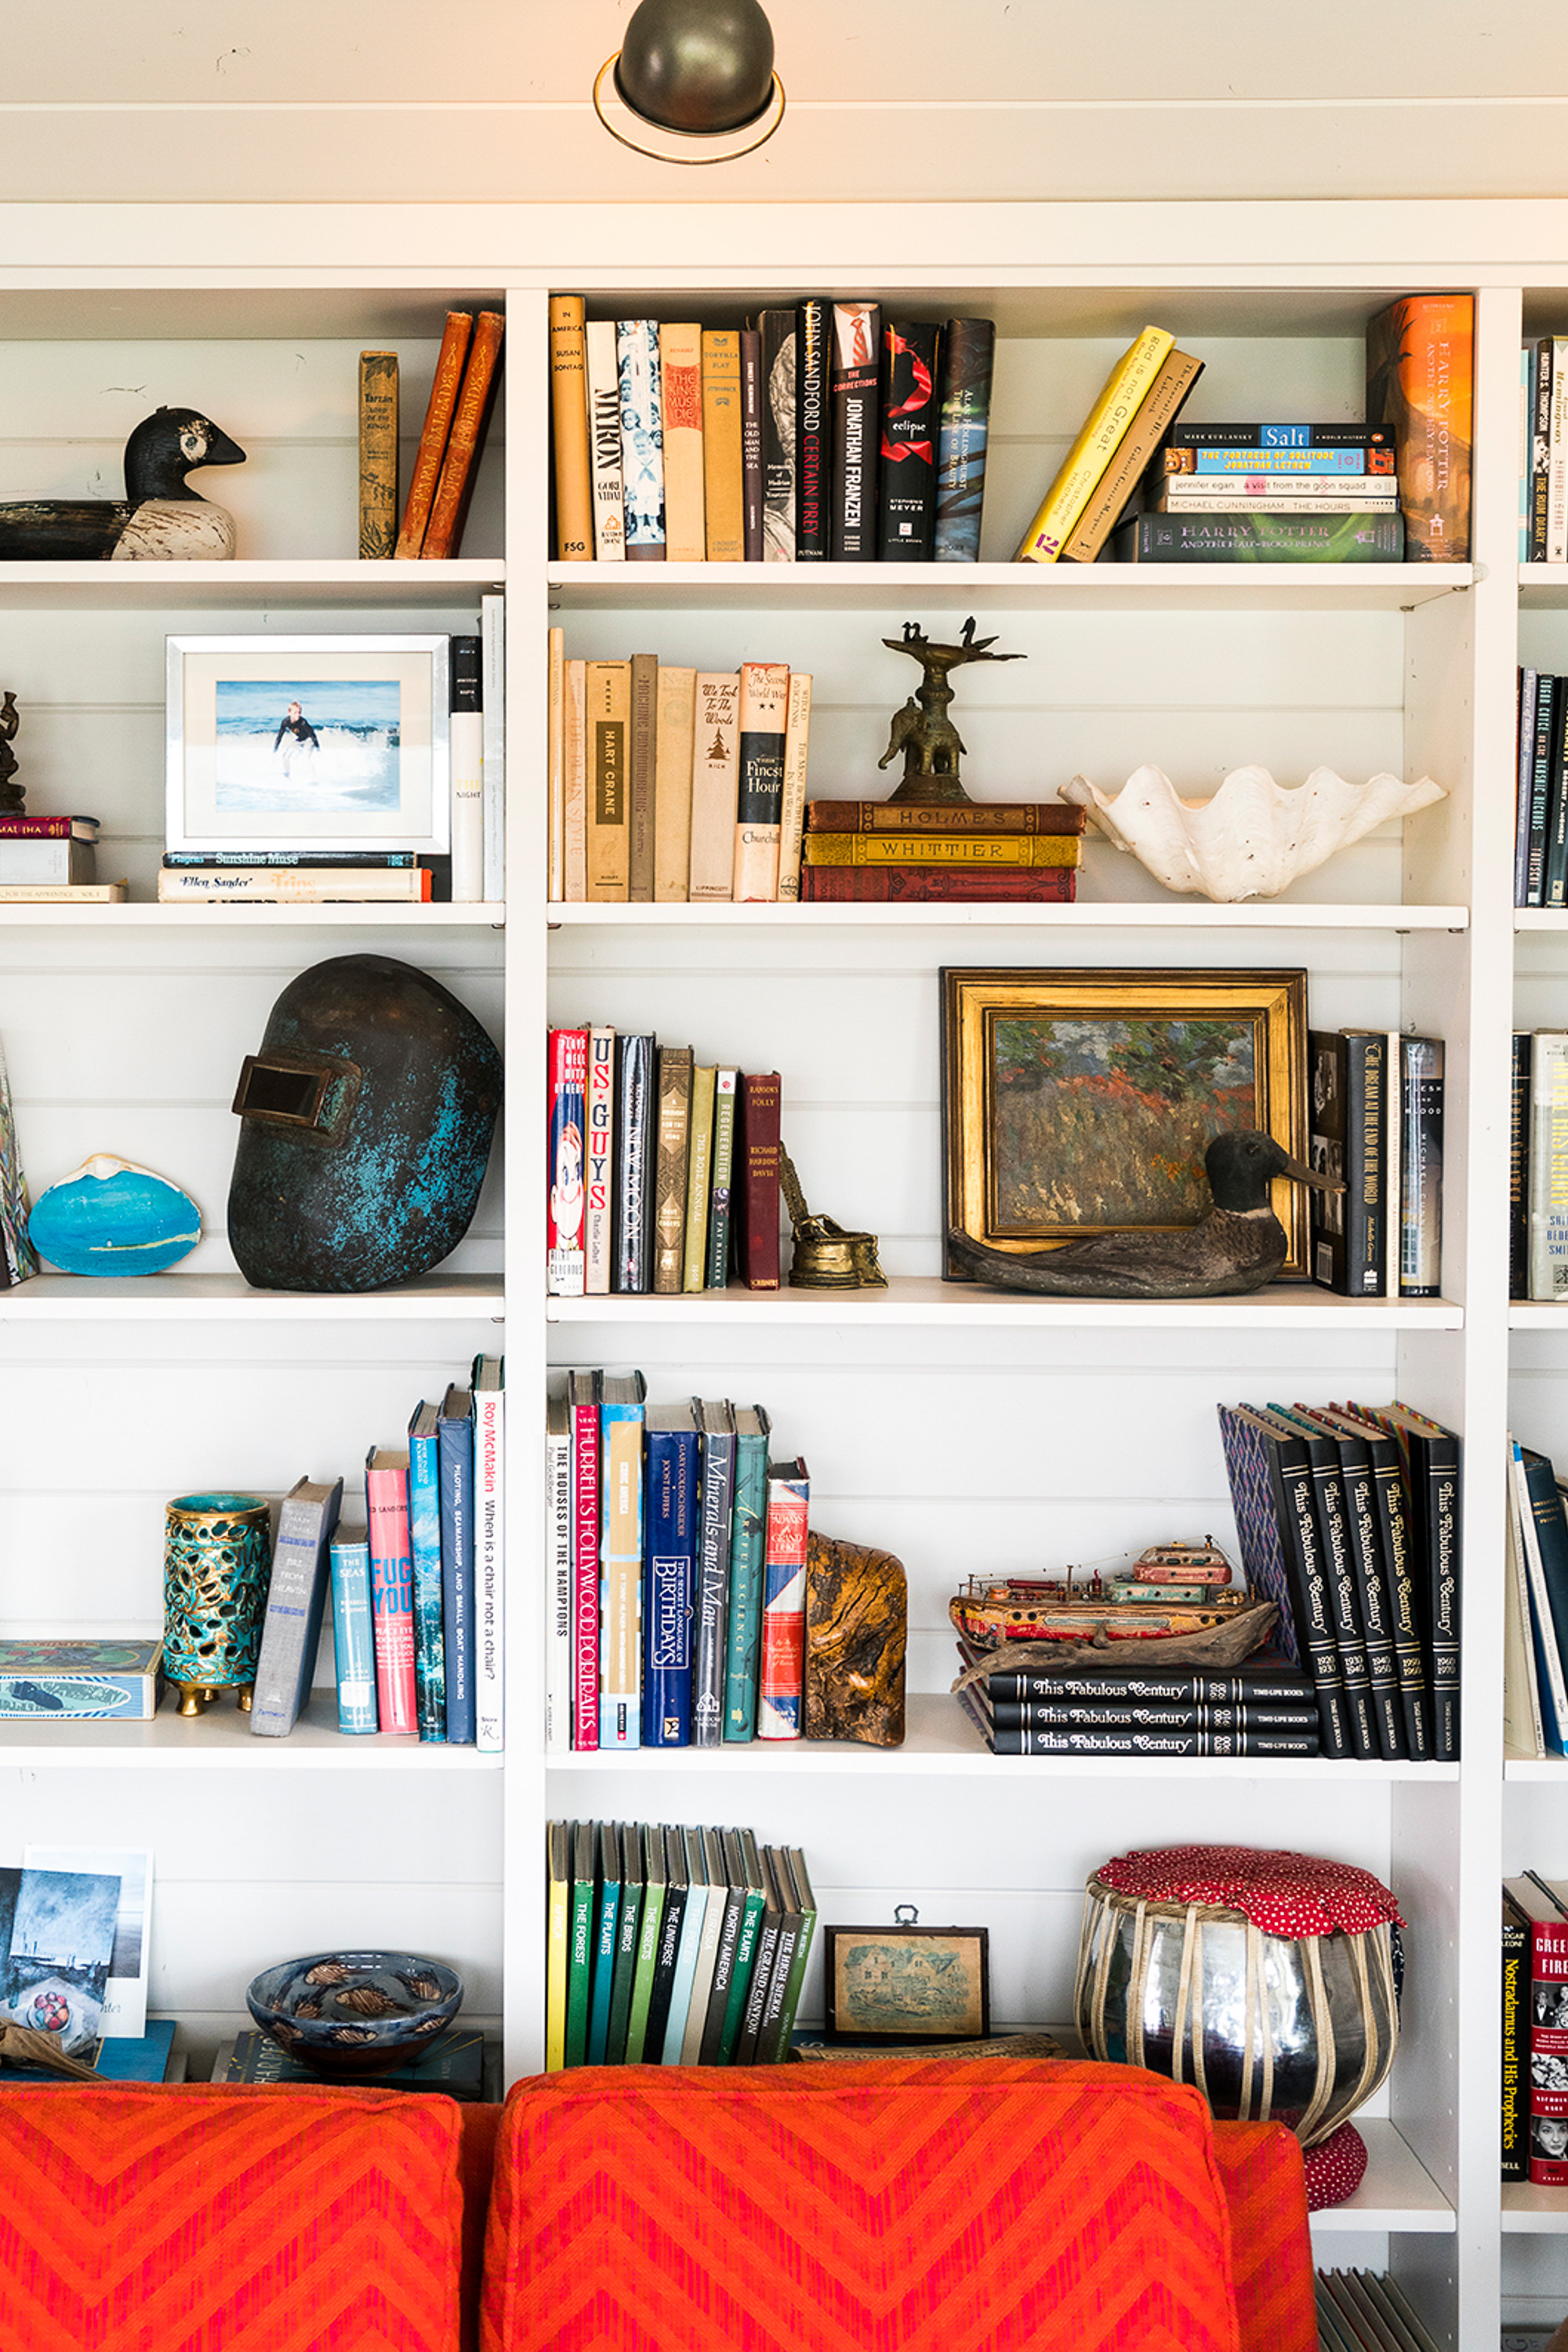 The built-in bookshelves in the living room display nautical treasures and well-loved antiques, adding to the room's eclectic charm.